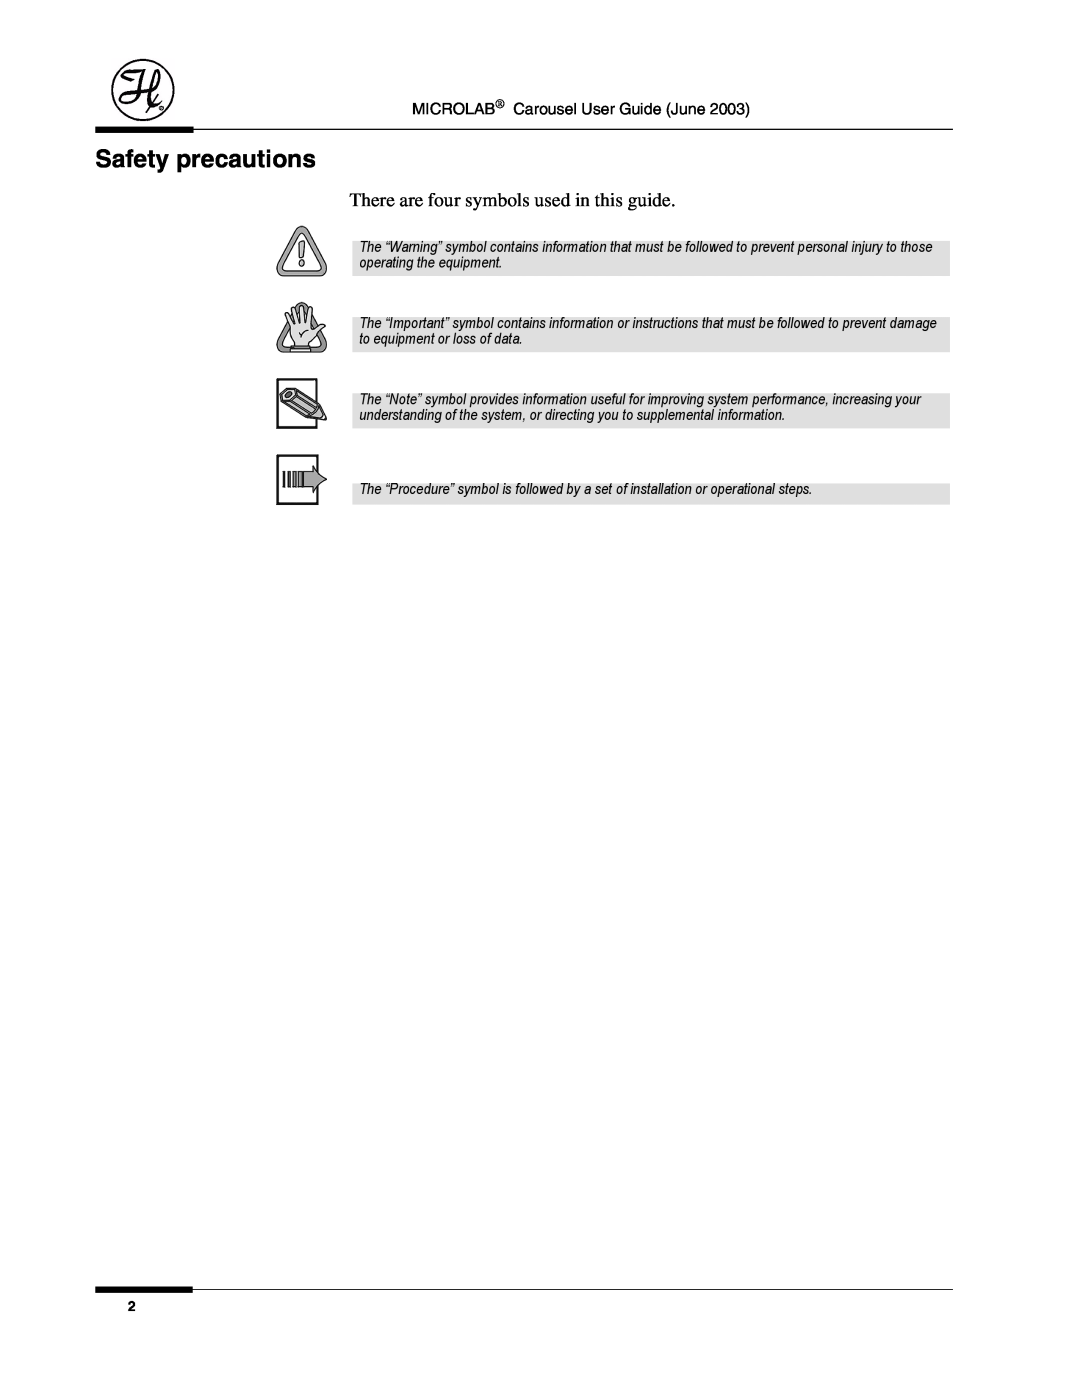 Hamilton Electronics 8534-01 manual Safety precautions, There are four symbols used in this guide 